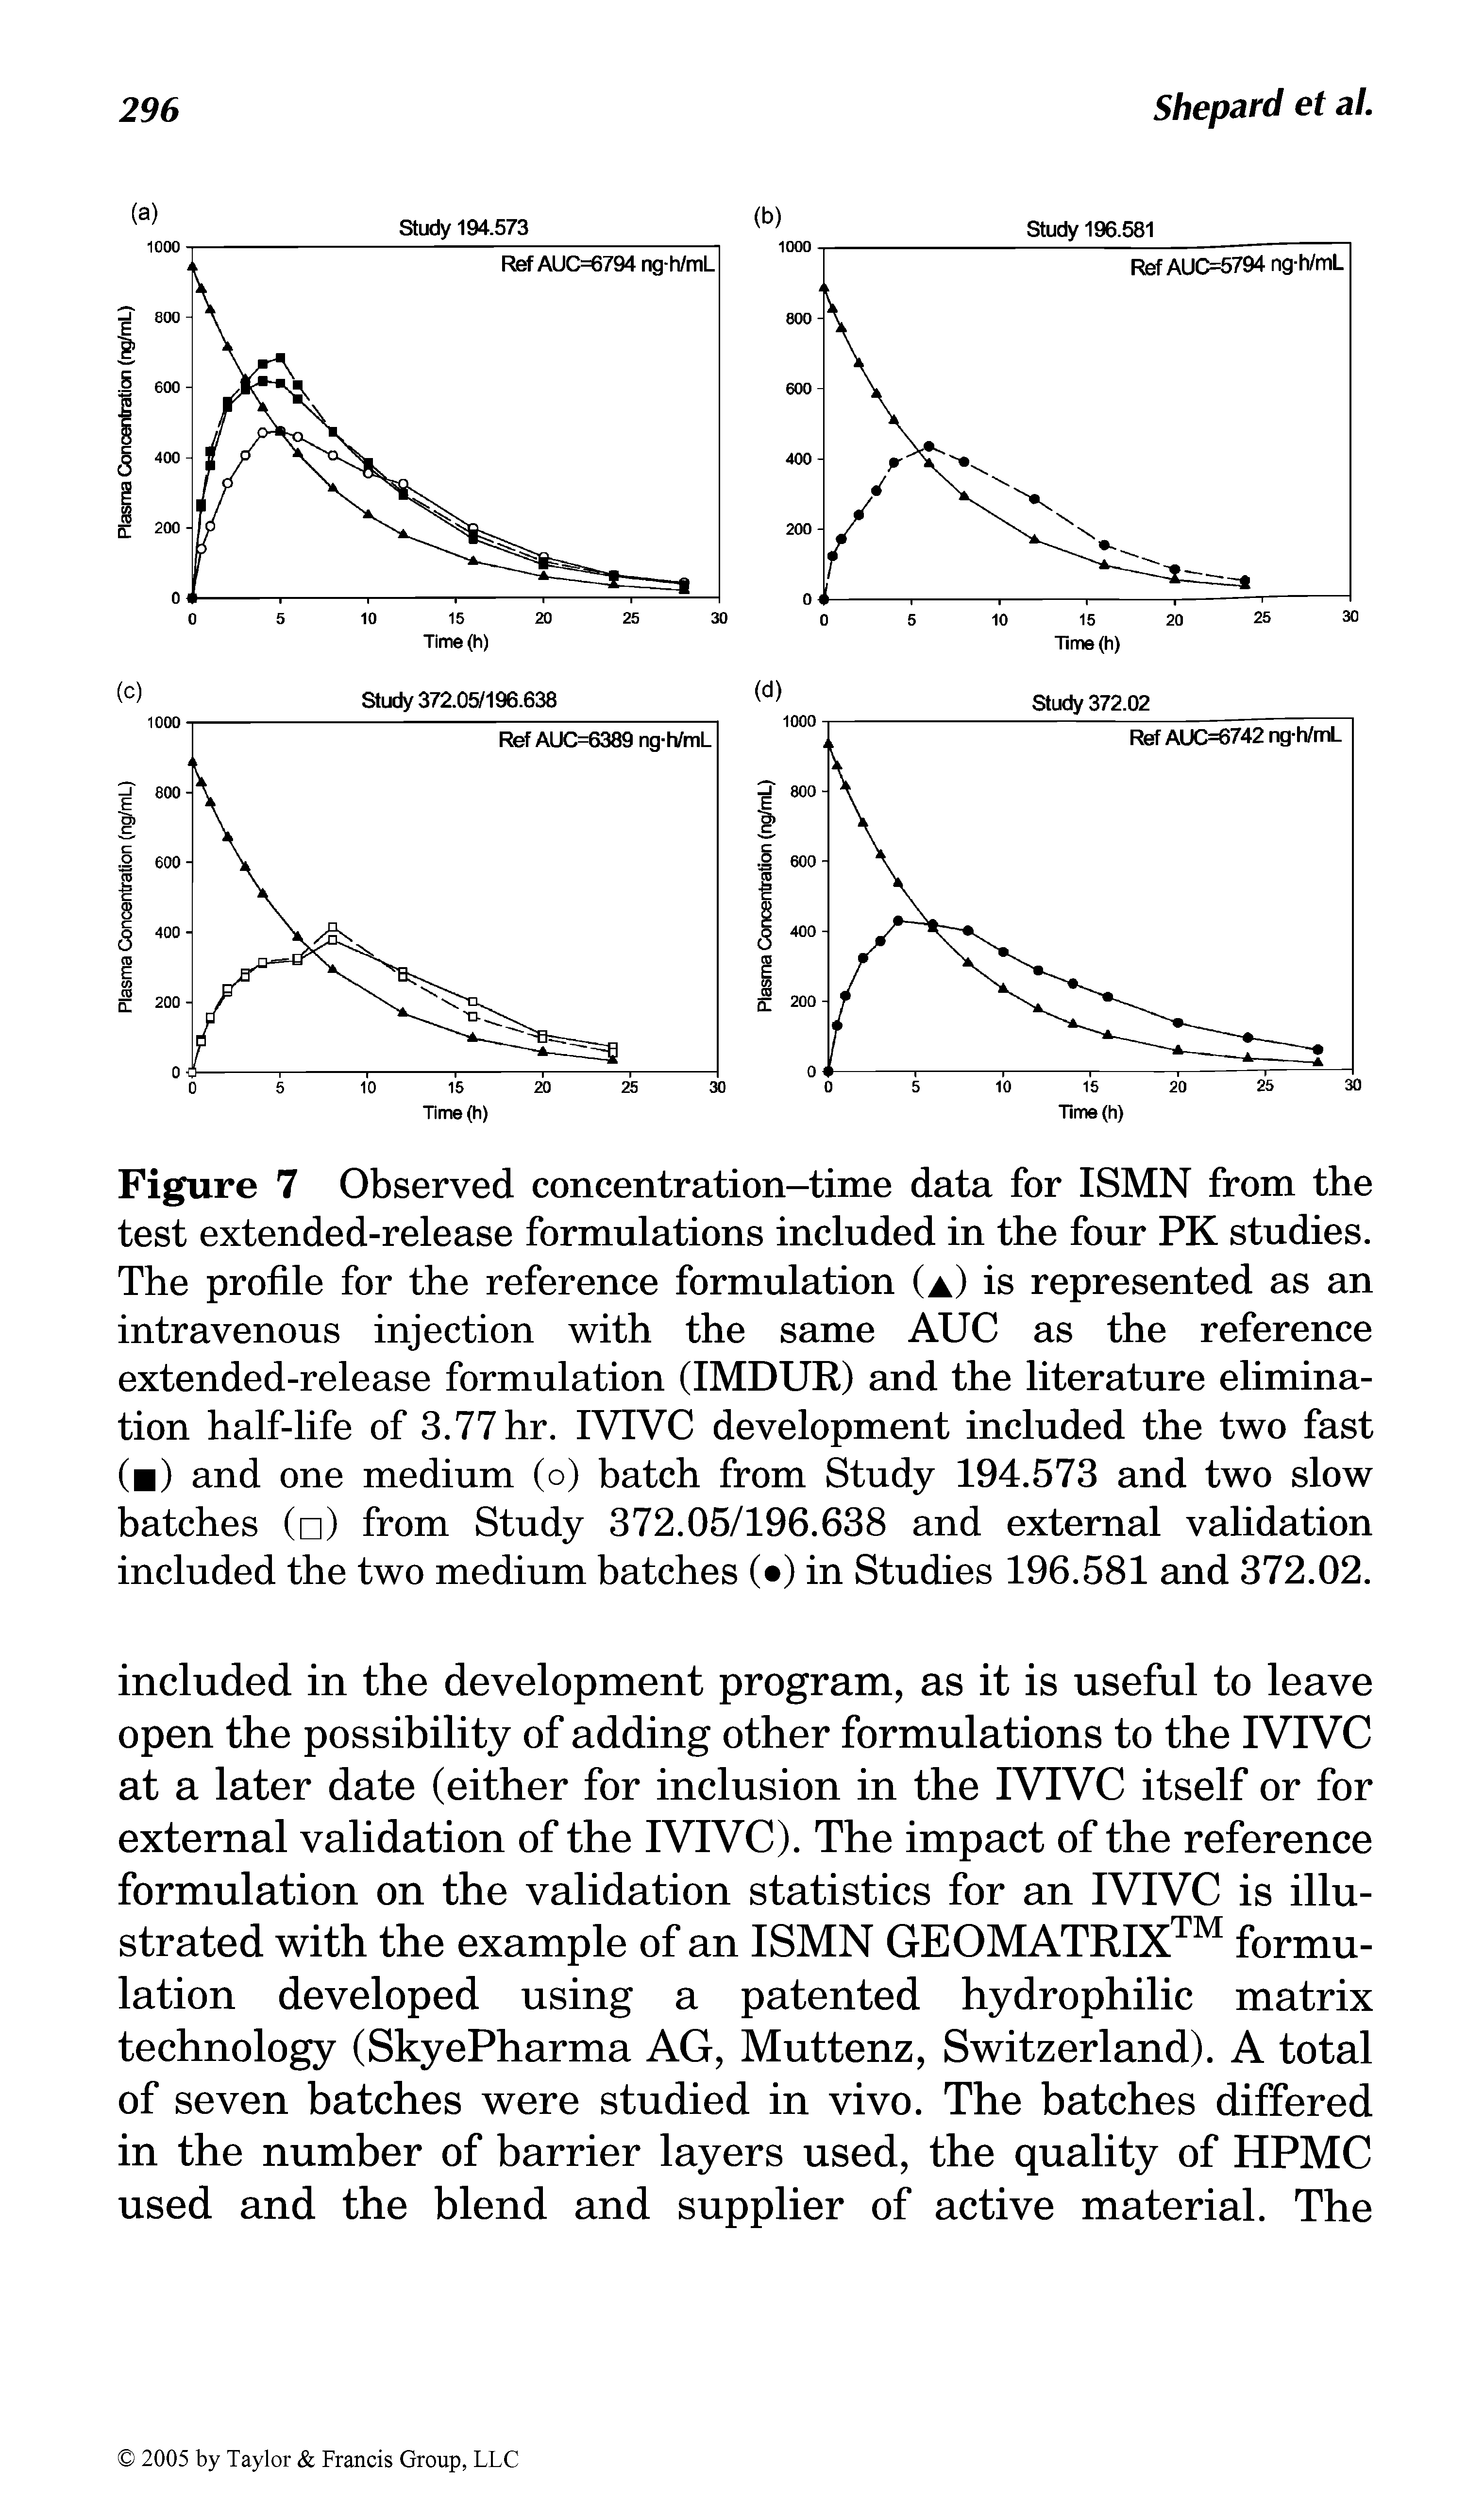 Figure 7 Observed concentration—time data for ISMN from the test extended-release formulations included in the four PK studies. The profile for the reference formulation (a) is represented as an intravenous injection with the same AUC as the reference extended-release formulation (IMDUR) and the literature elimination half-life of 3.77 hr. IVIVC development included the two fast ( ) and one medium (o) batch from Study 194.573 and two slow batches ( ) from Study 372.05/196.638 and external validation included the two medium batches ( ) in Studies 196.581 and 372.02.